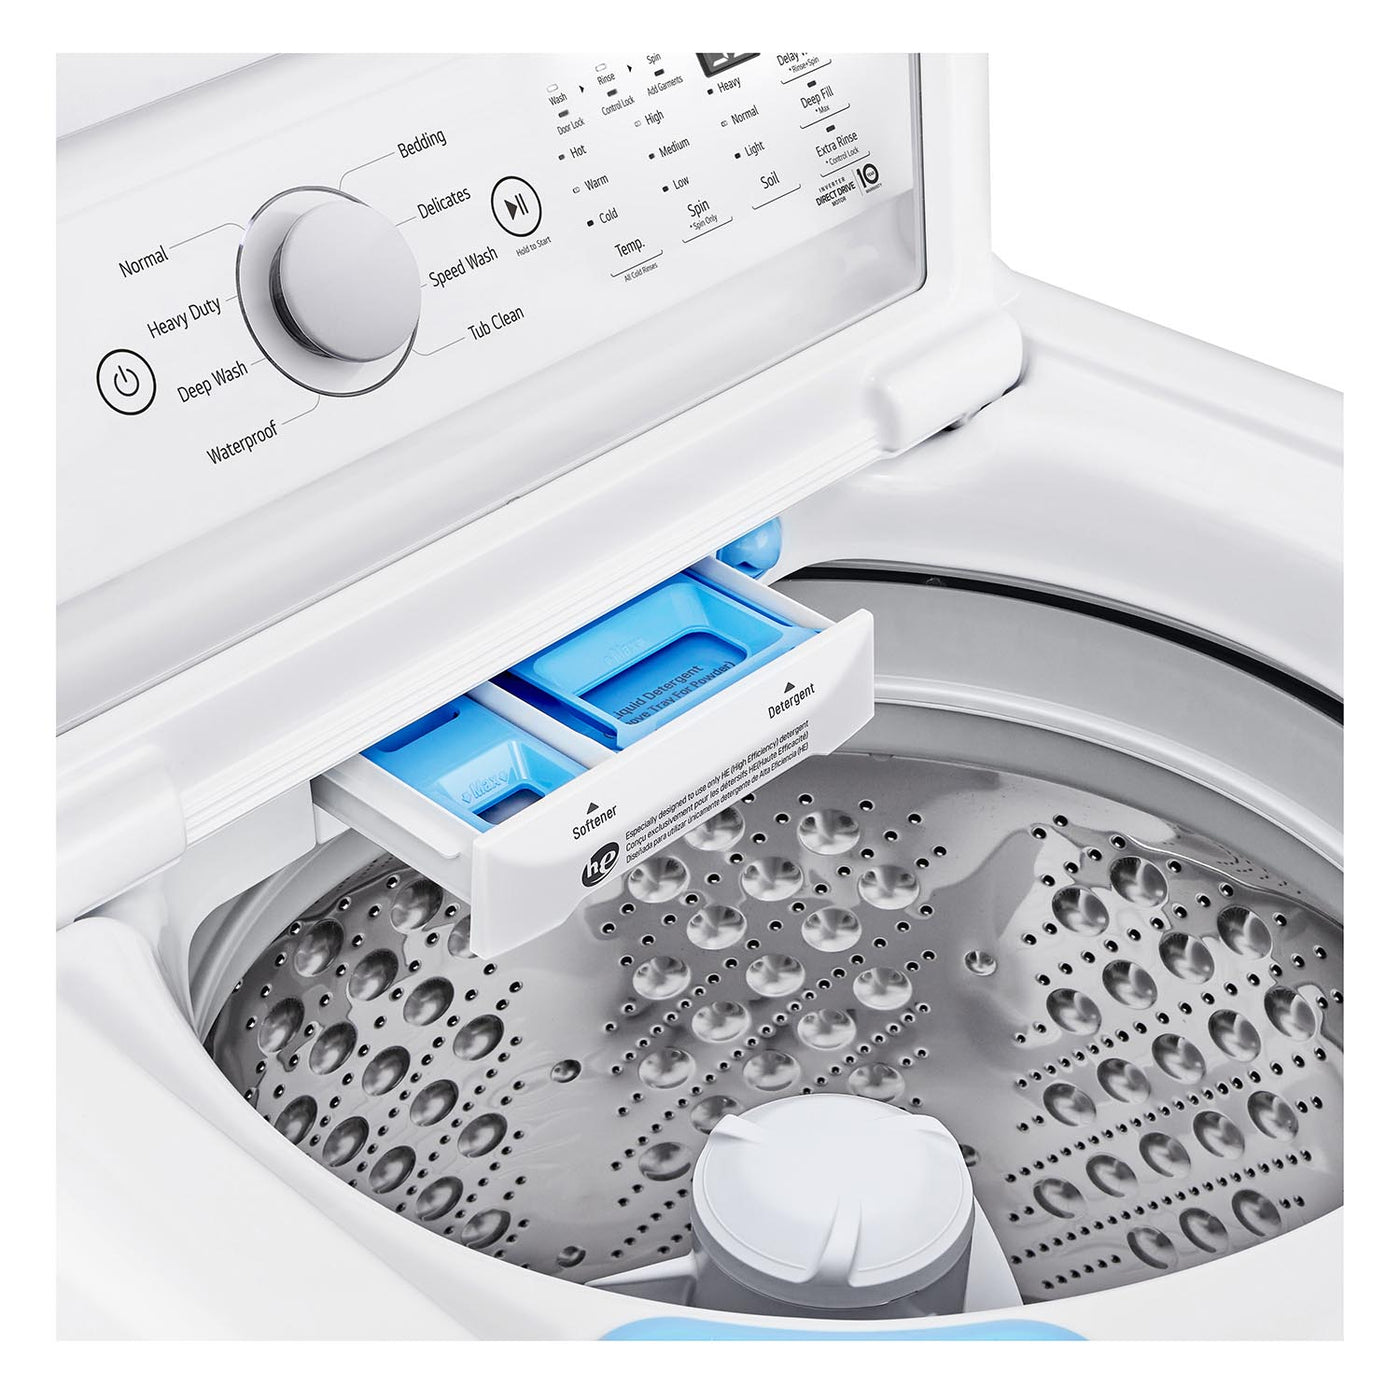 LG White Top Load Agitator Washer with 6Motion™ Technology (5.6 Cu. Ft) - WT7155CW